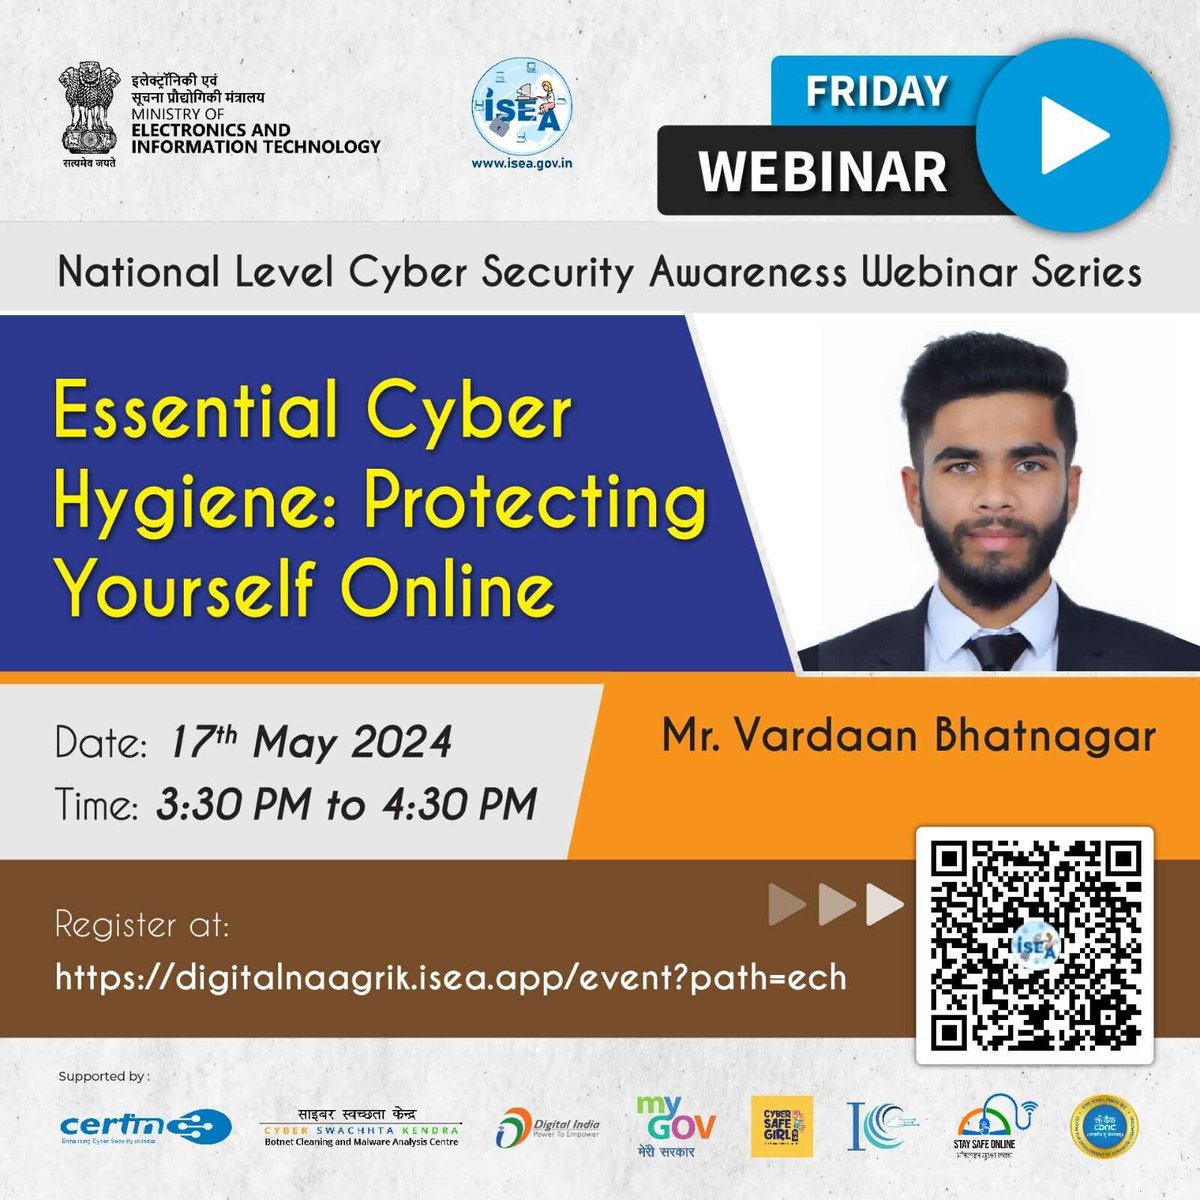 Join for an insightful journey into Essential Cyber Hygiene! 🚀 Learn how to safeguard yourself online with expert tips during our engaging #FridayWebinars. Don't miss out on securing your digital life! 💻🔒 #OnlineSafety #CyberSecurity' Weblink: digitalnaagrik.isea.app/event?path=ech